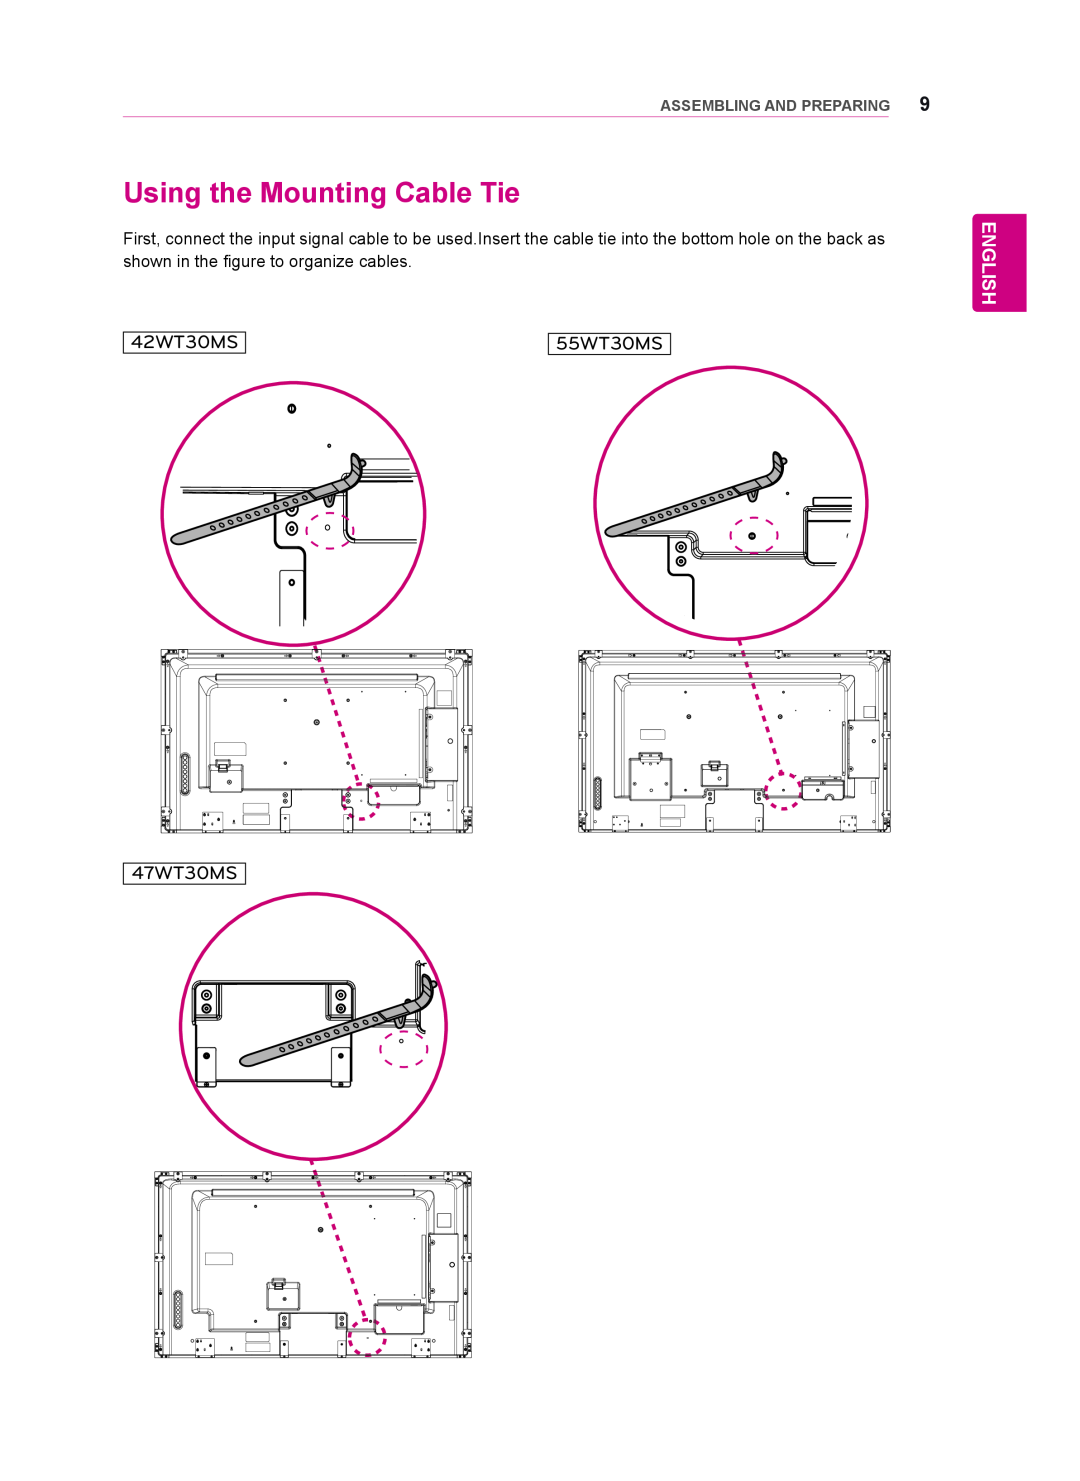 LG Electronics 55WT30MS owner manual Using the Mounting Cable Tie, English, 42WT30MS, 47WT30MS, Assembling And Preparing 